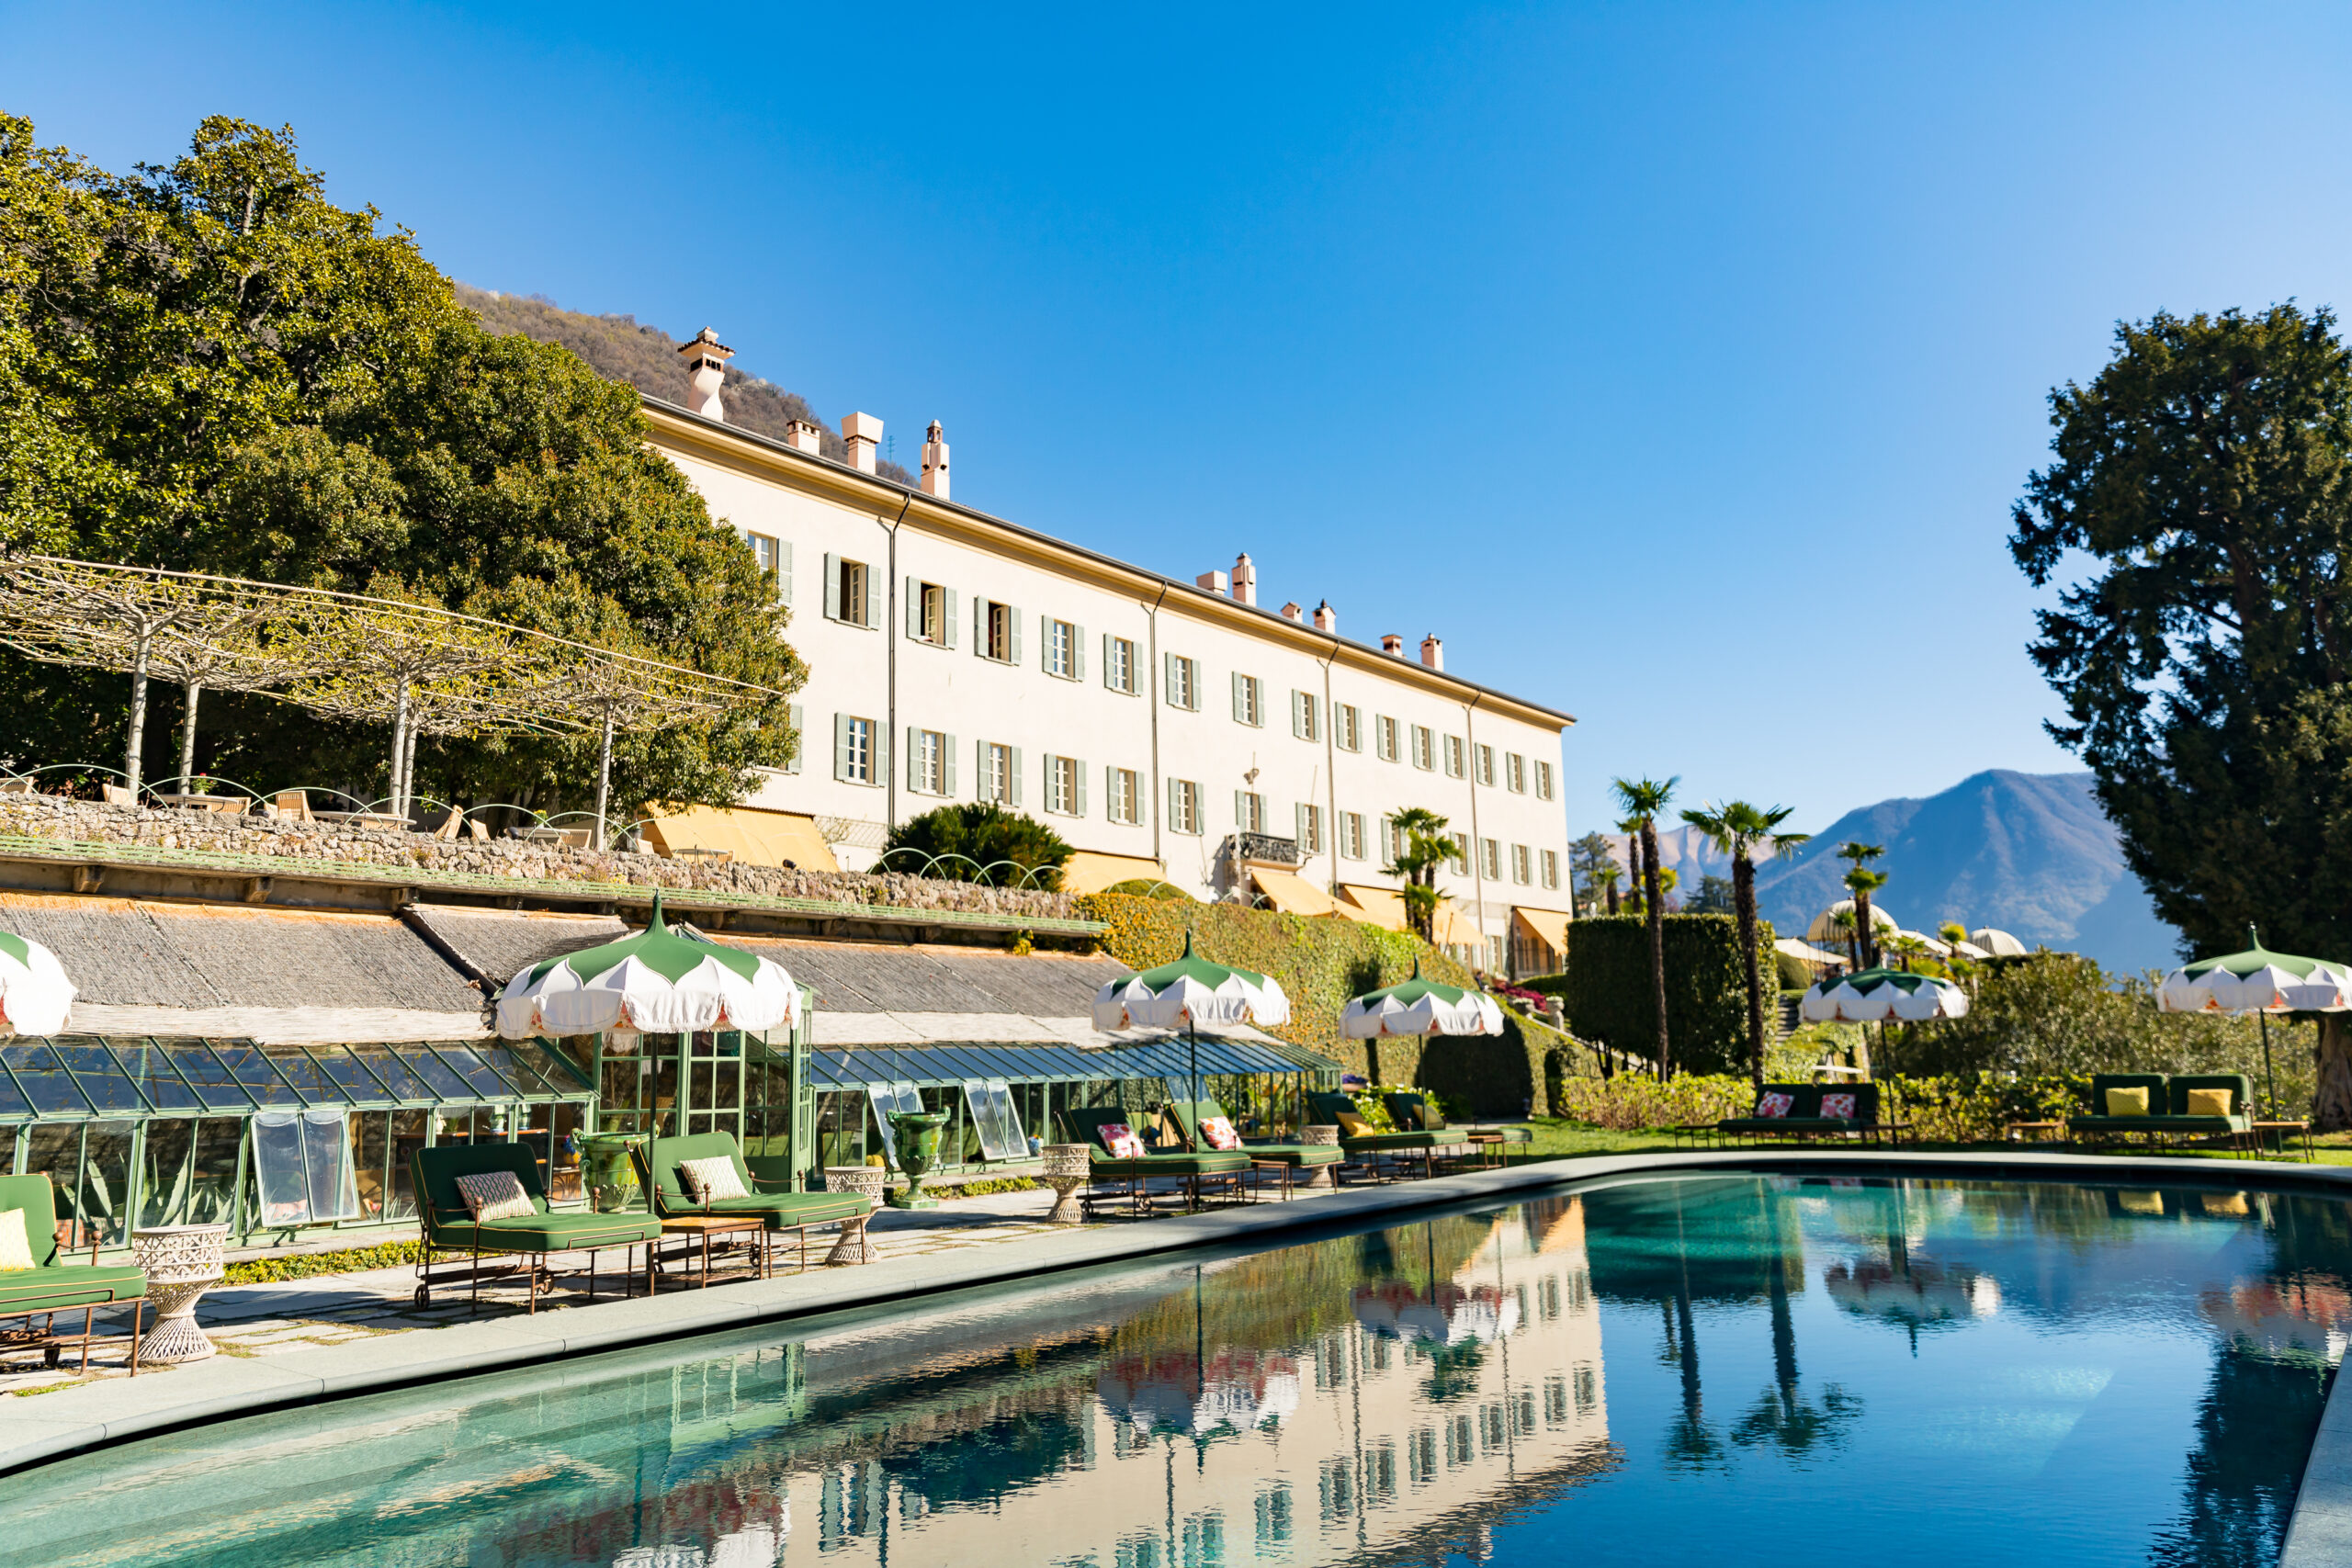 The Best Hotel in the World is on Lake Como